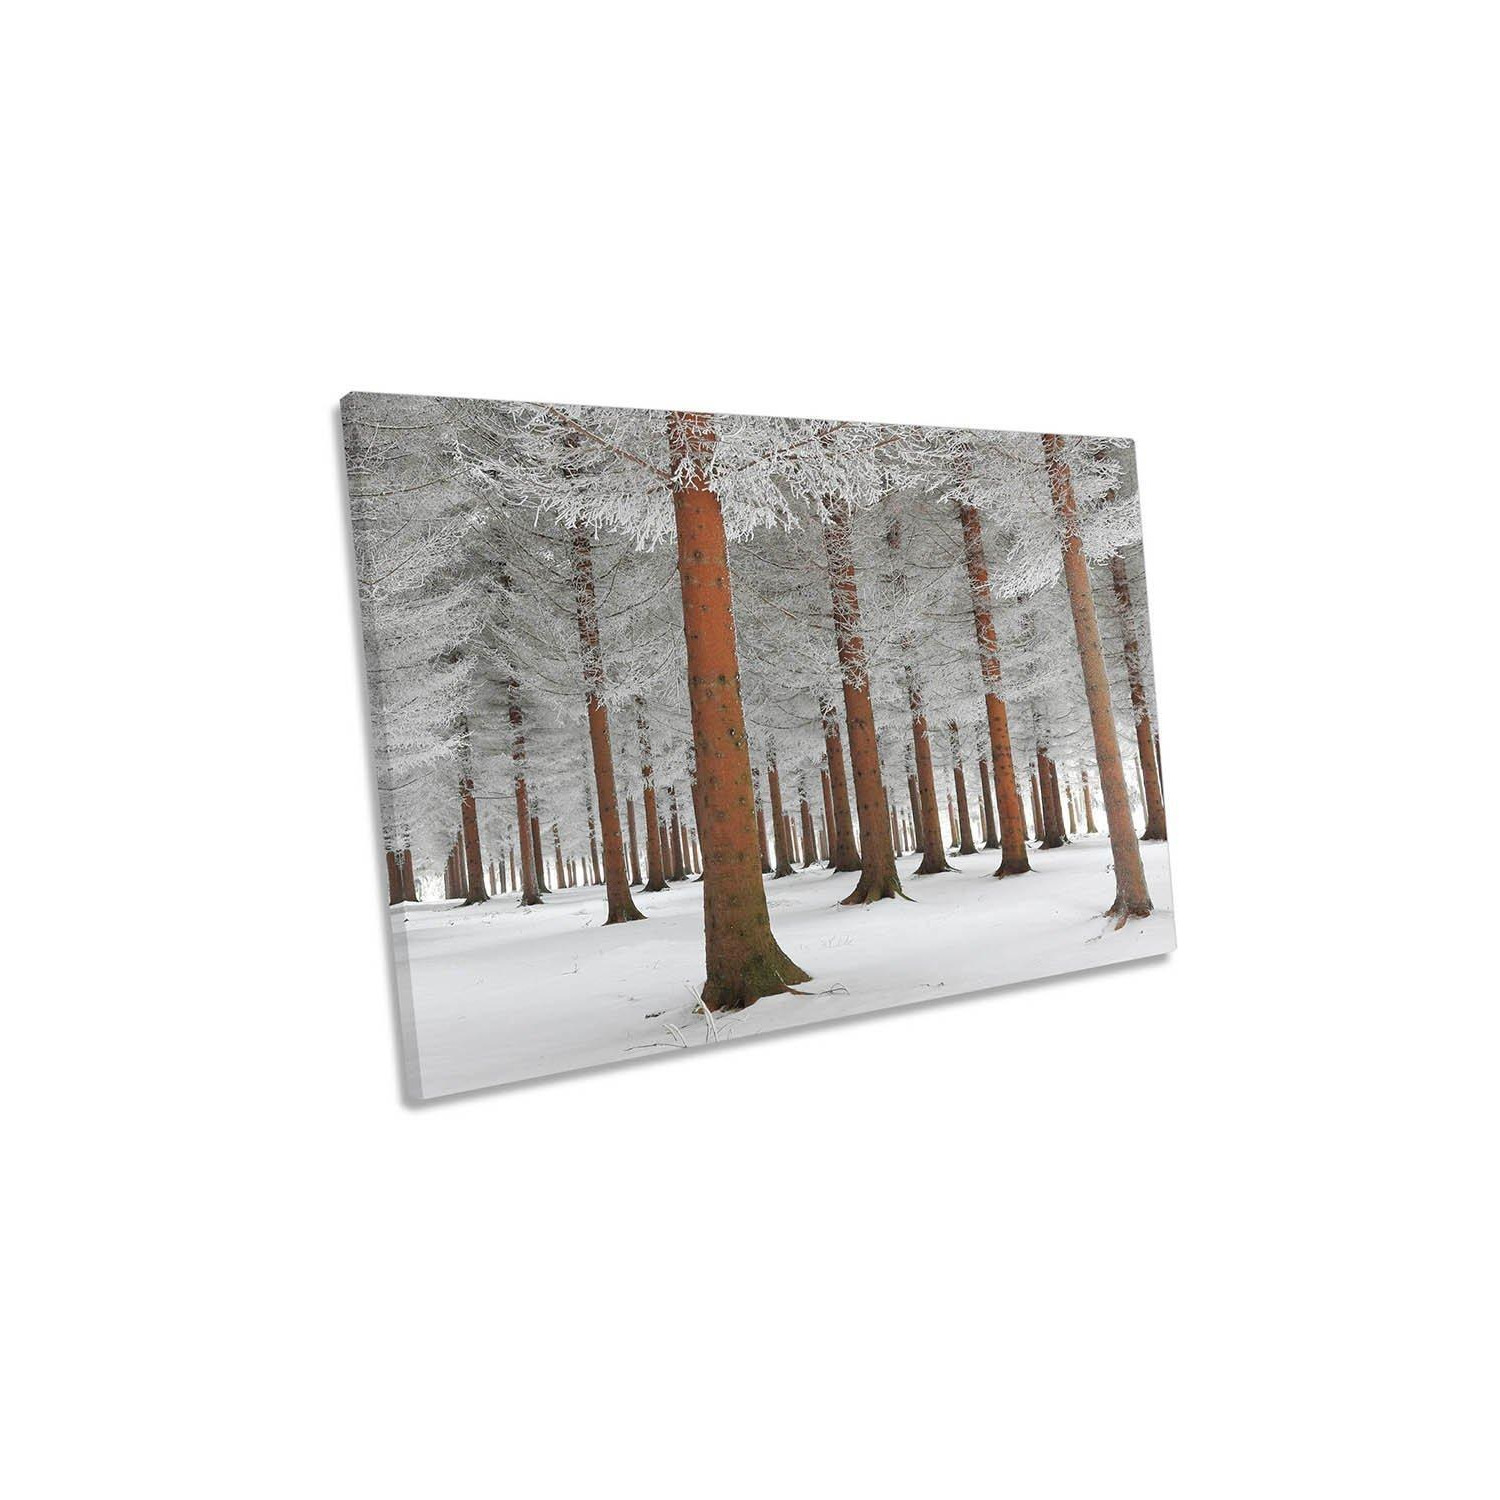 The White Forest Snow Winter Canvas Wall Art Picture Print - image 1